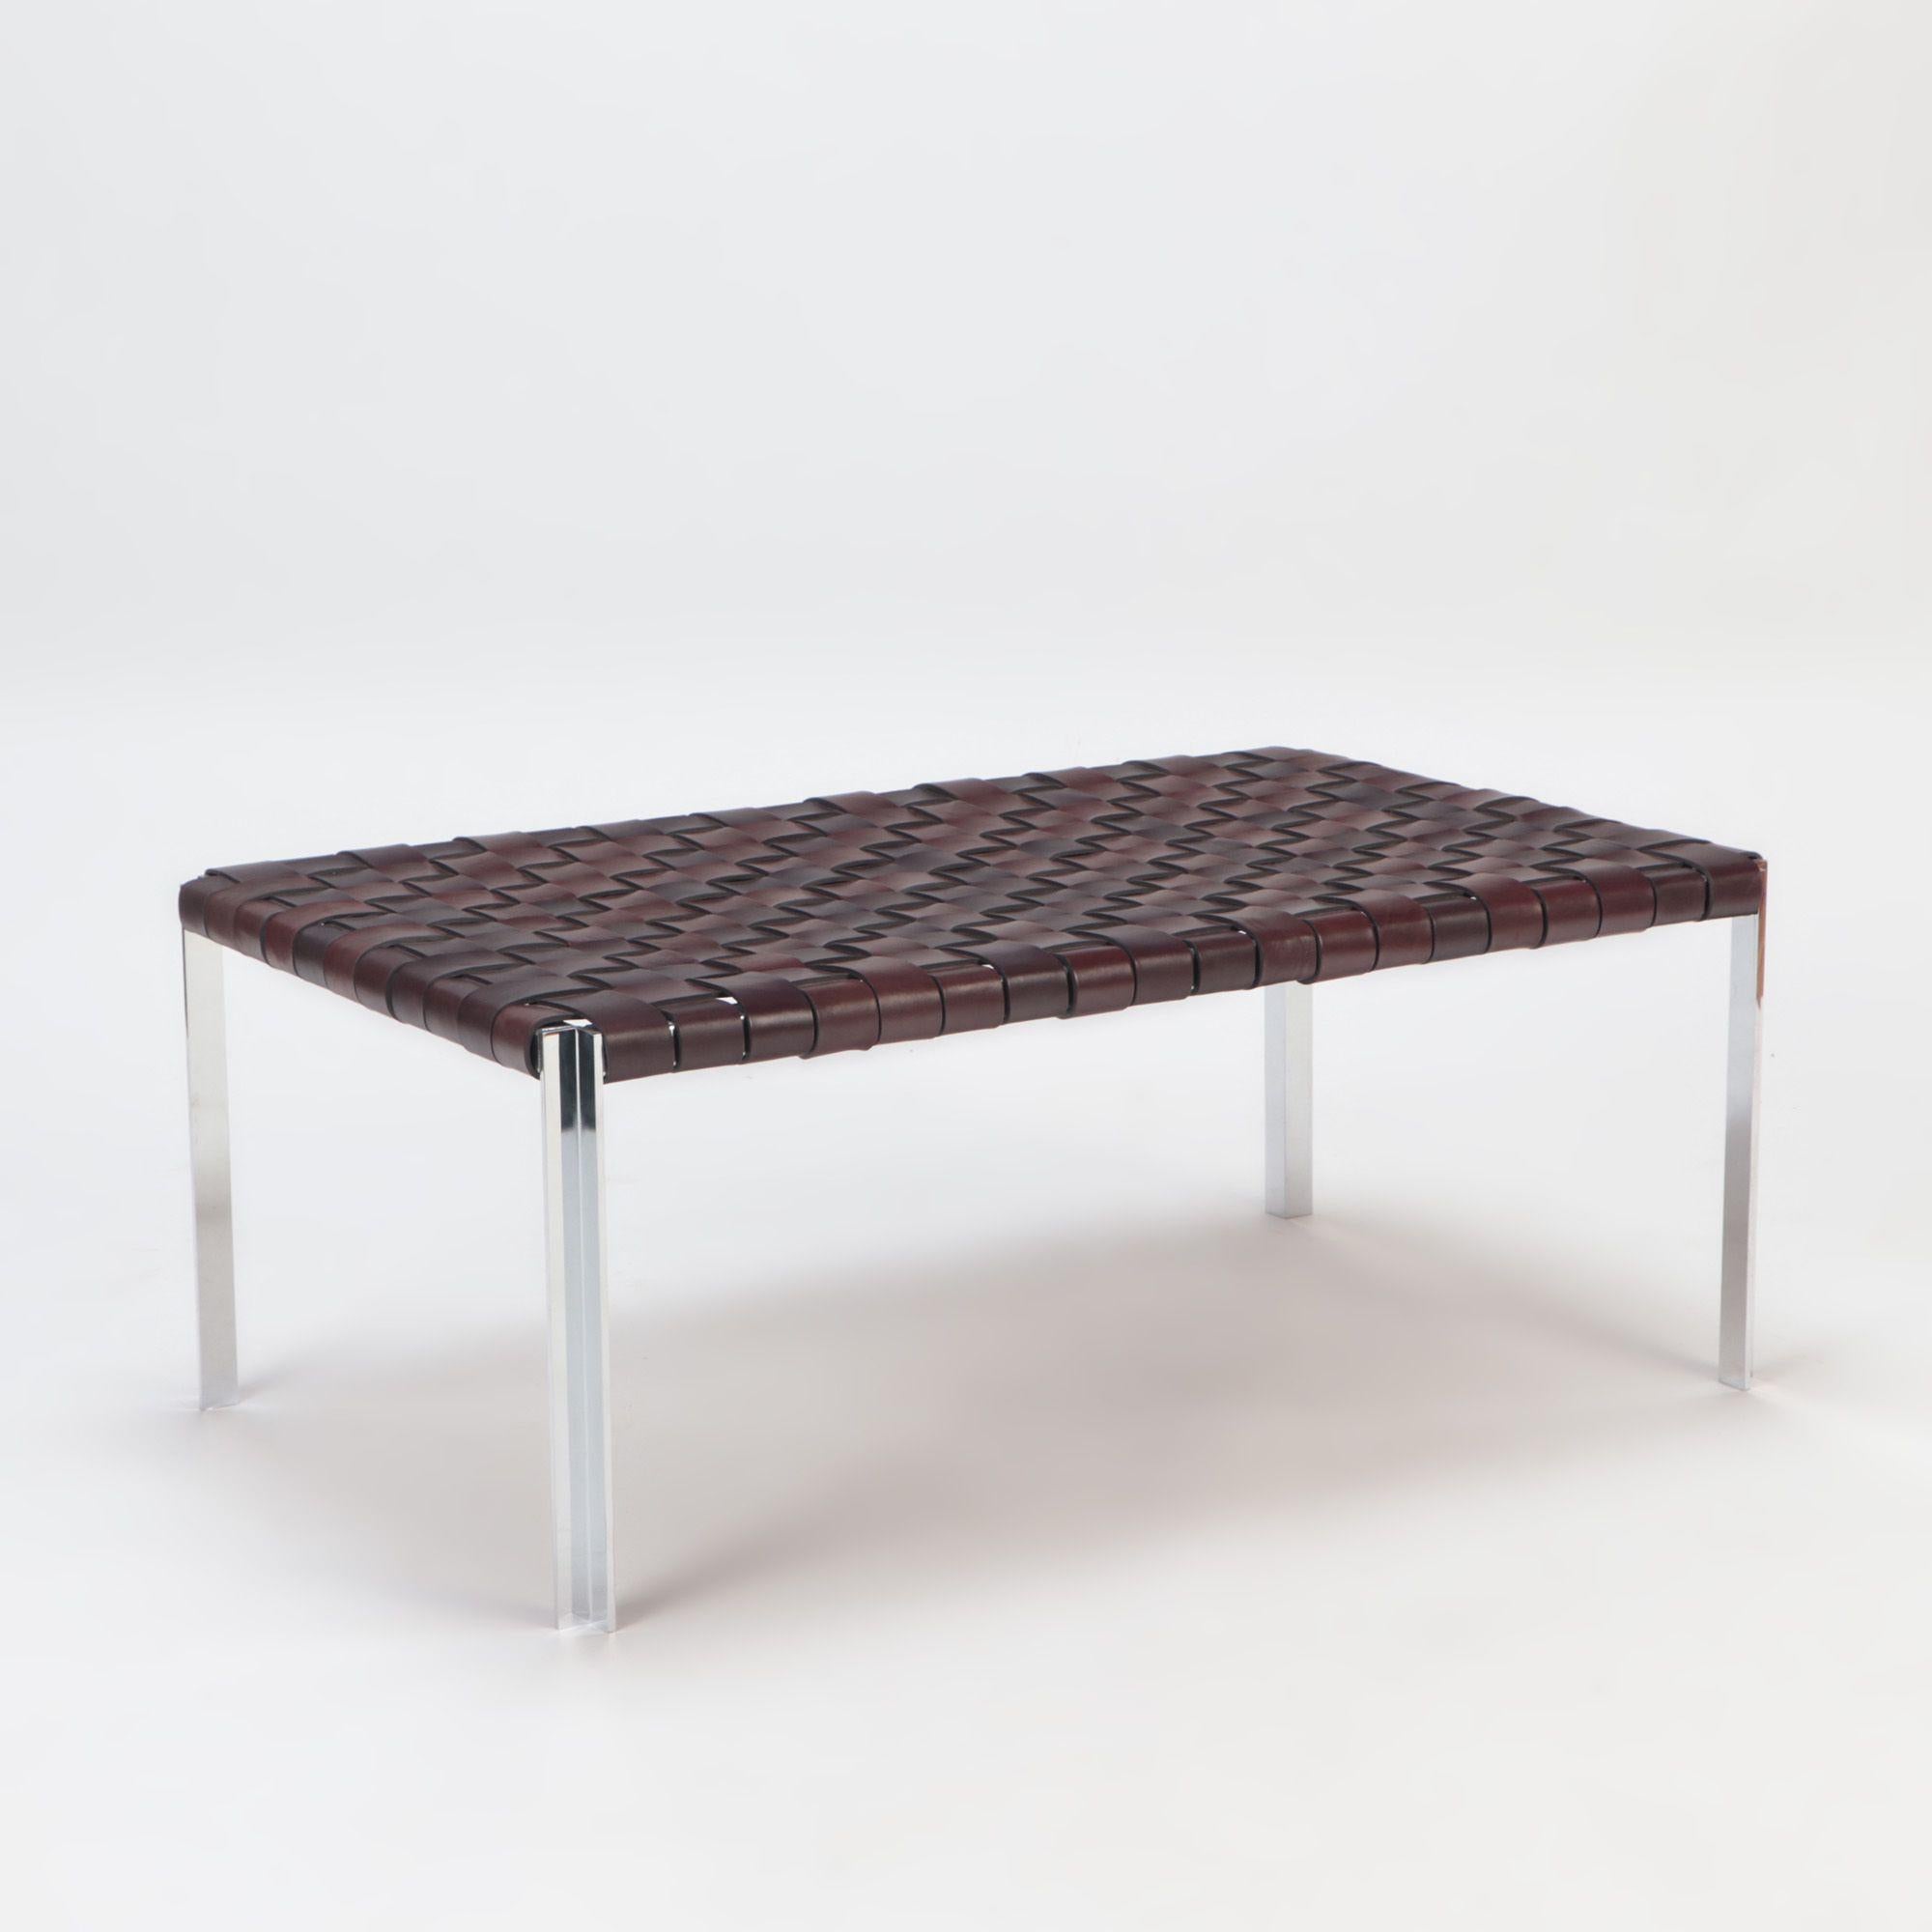 Mid-Century Modern  Dark brown leather with polished chrome finish bench. Contemporary